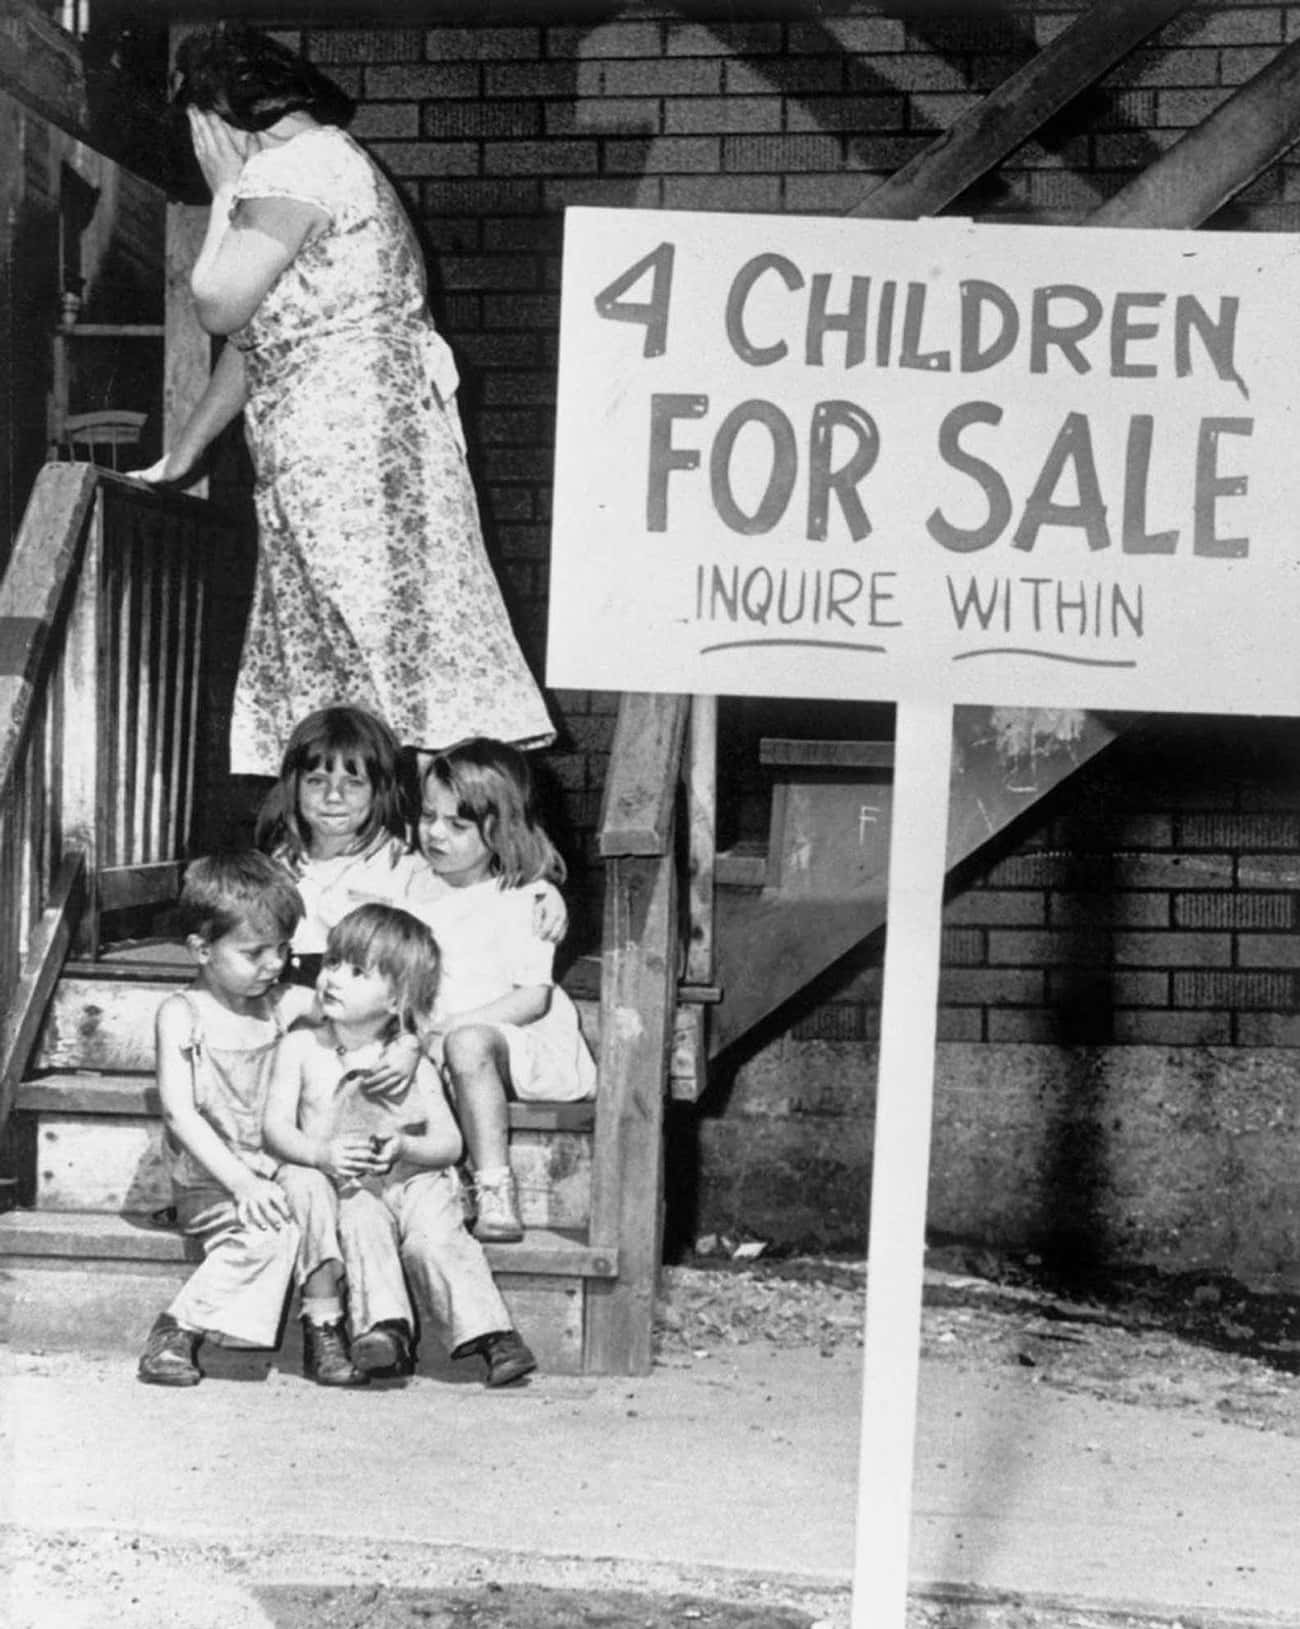 Their Mother Was Pregnant When She Sold Her Kids And Later Also Sold The Unborn Baby